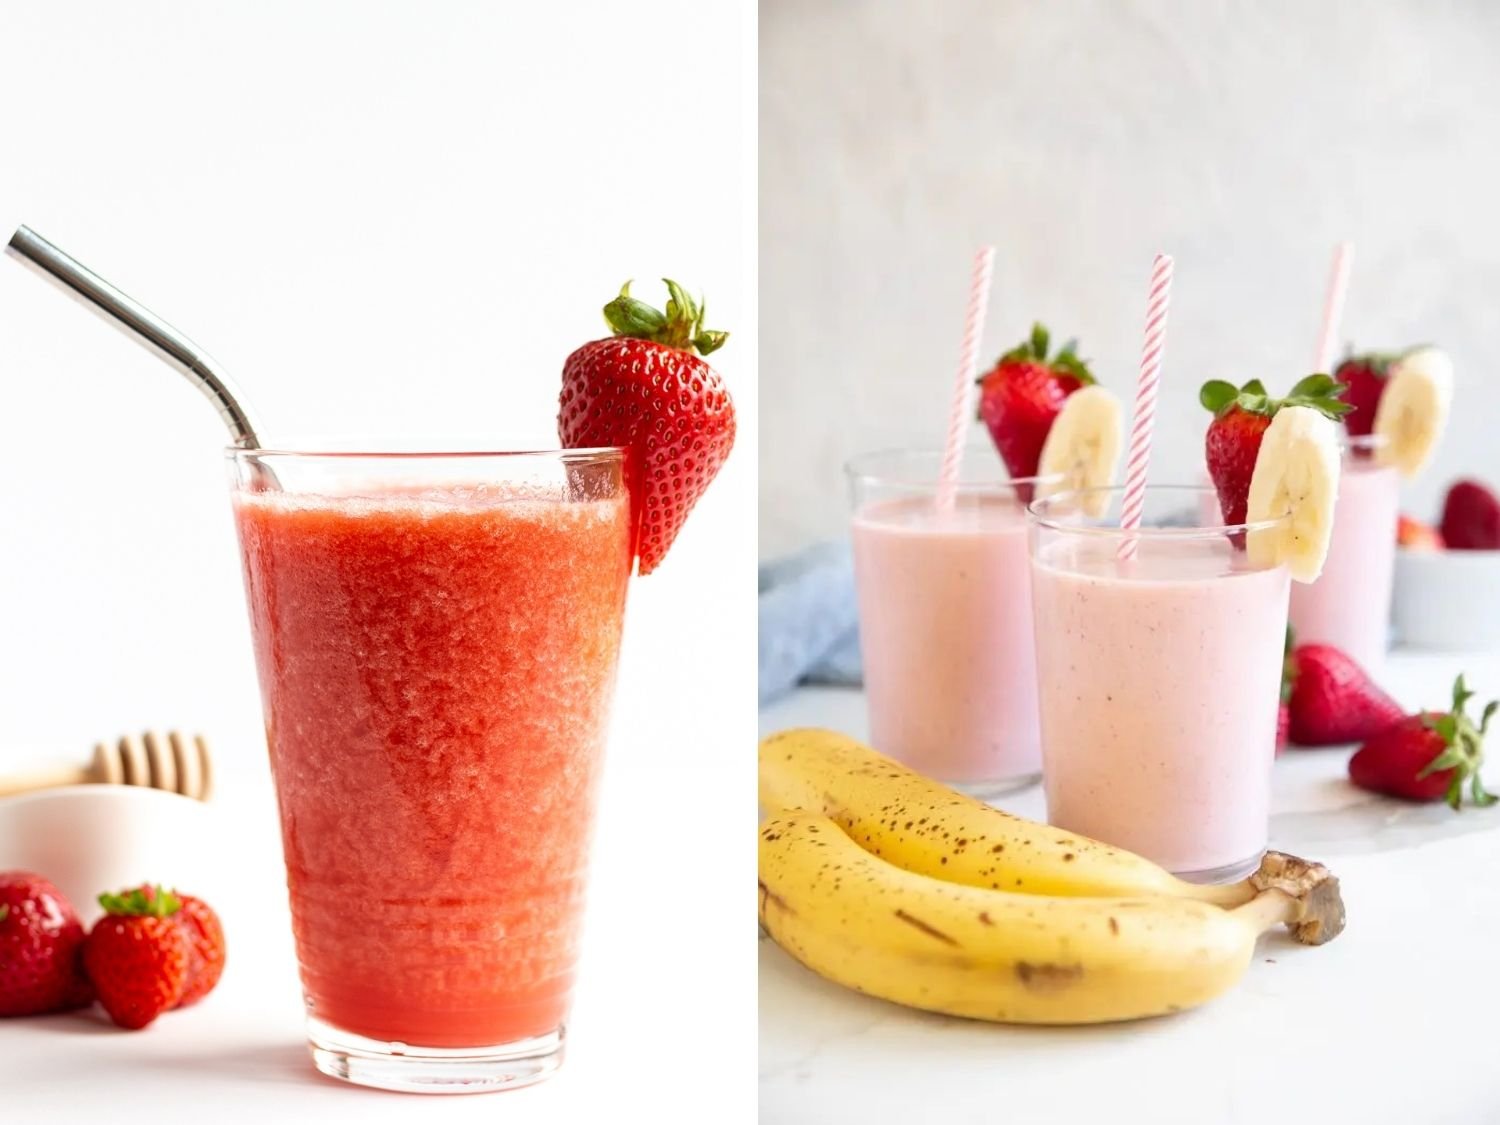 Collage of healthy smoothies for kids.